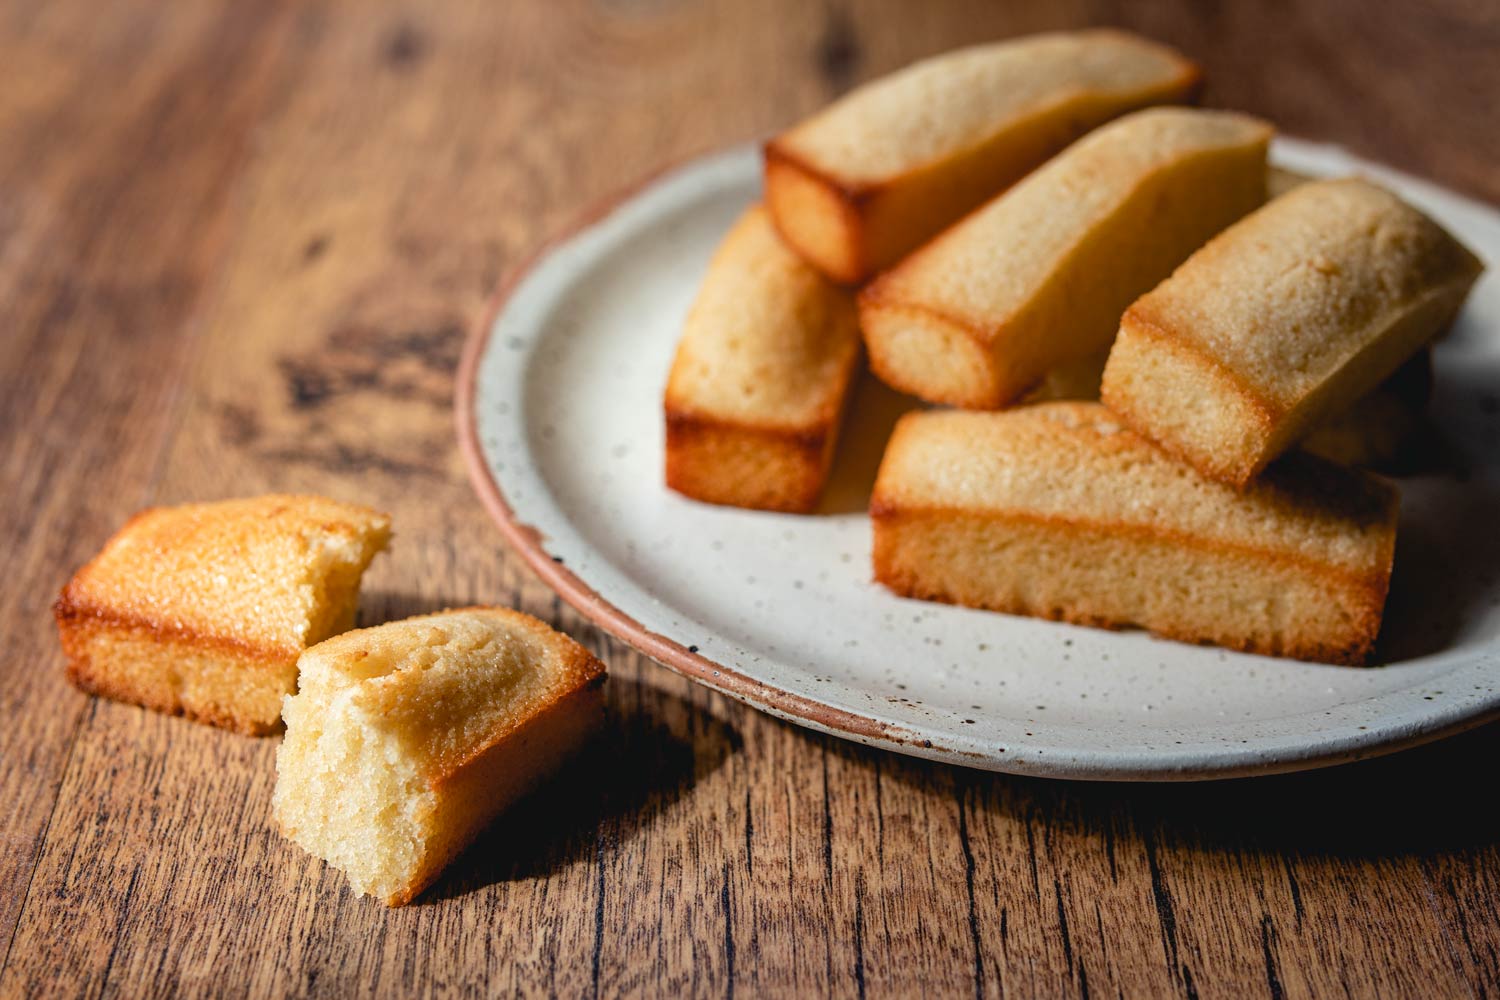 Financiers: French Almond Cakes